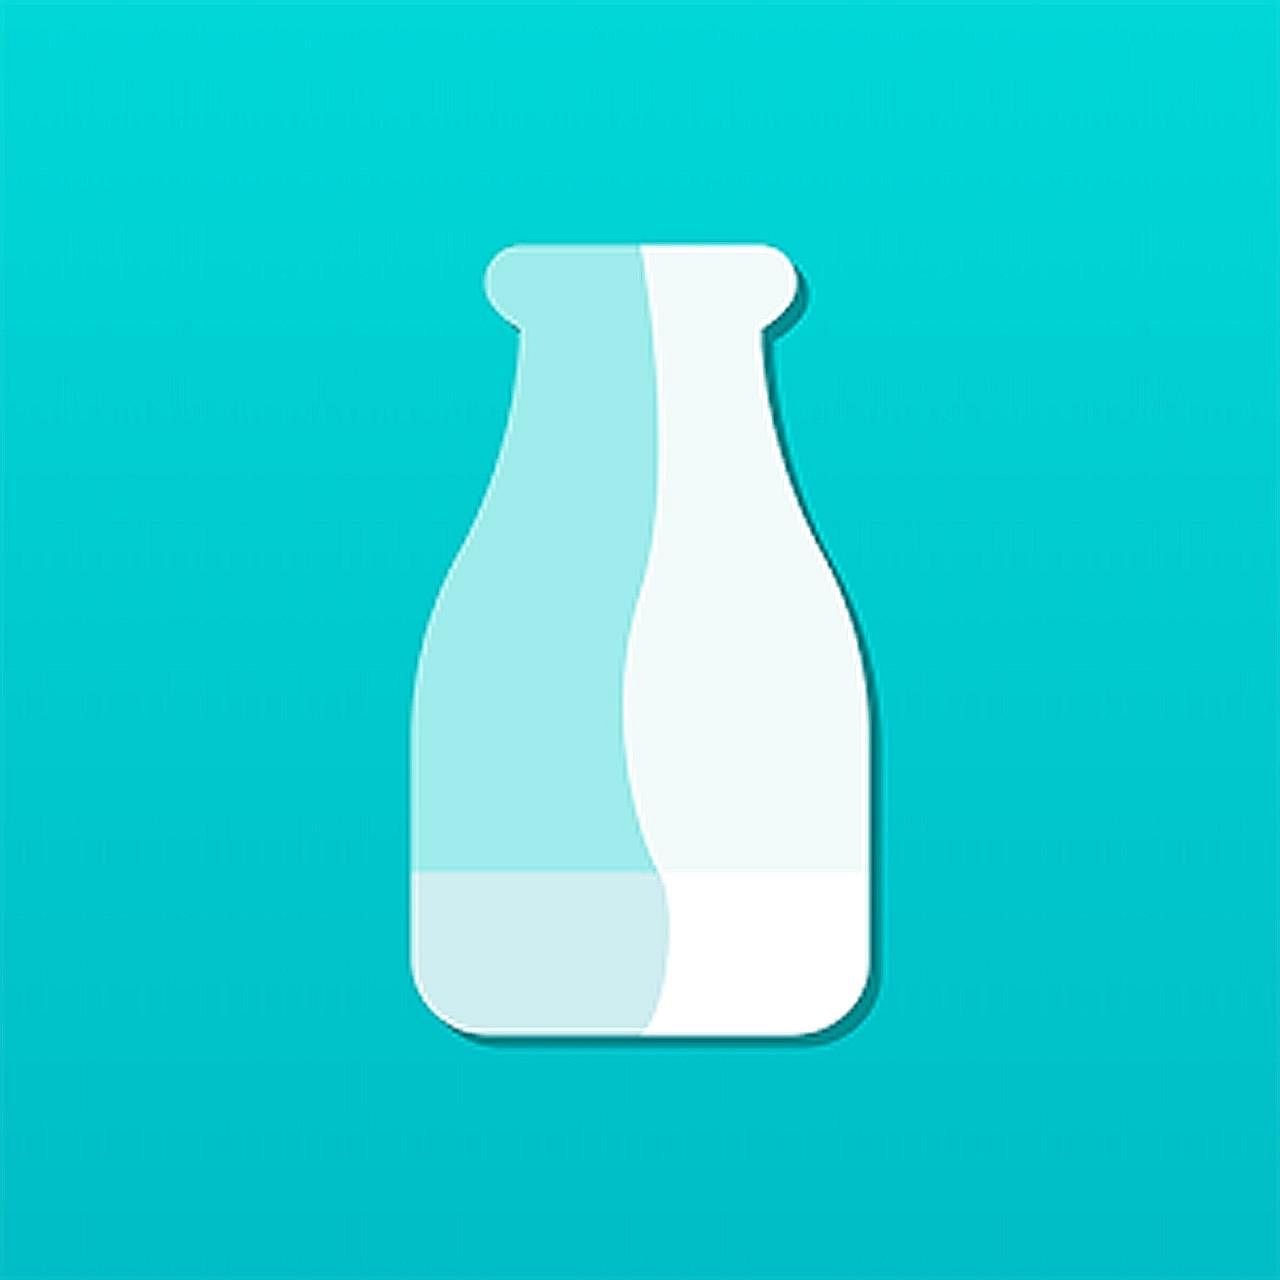 With the Out Of Milk app, users are not only able to create a grocery shopping list, but also a pantry list to track the items at home and their expiry dates.